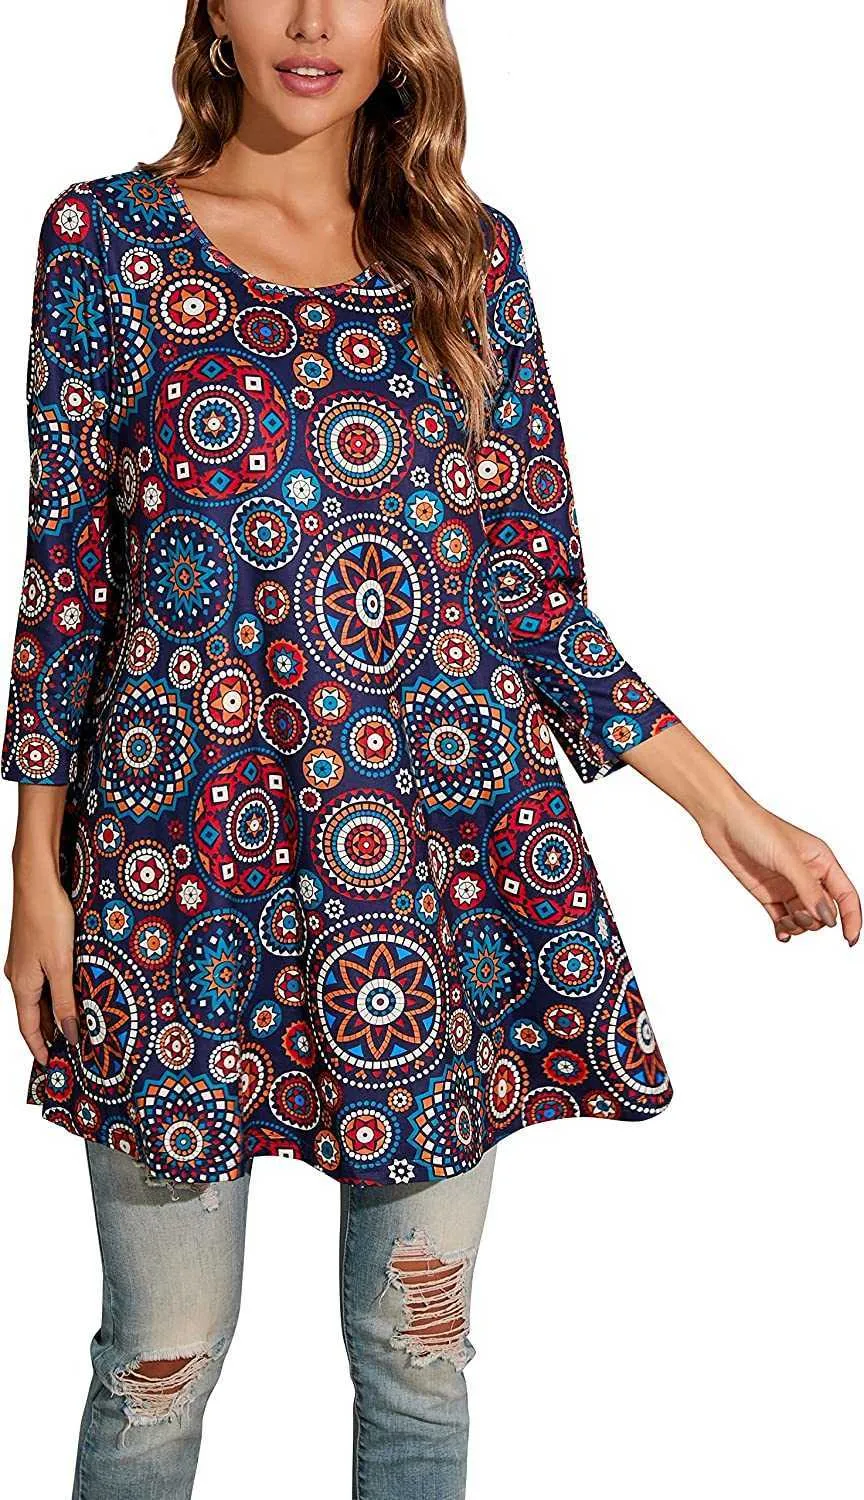 ENMAIN Plus Size Flowy Tops Paisley Floral Swing Flare Tunic Top